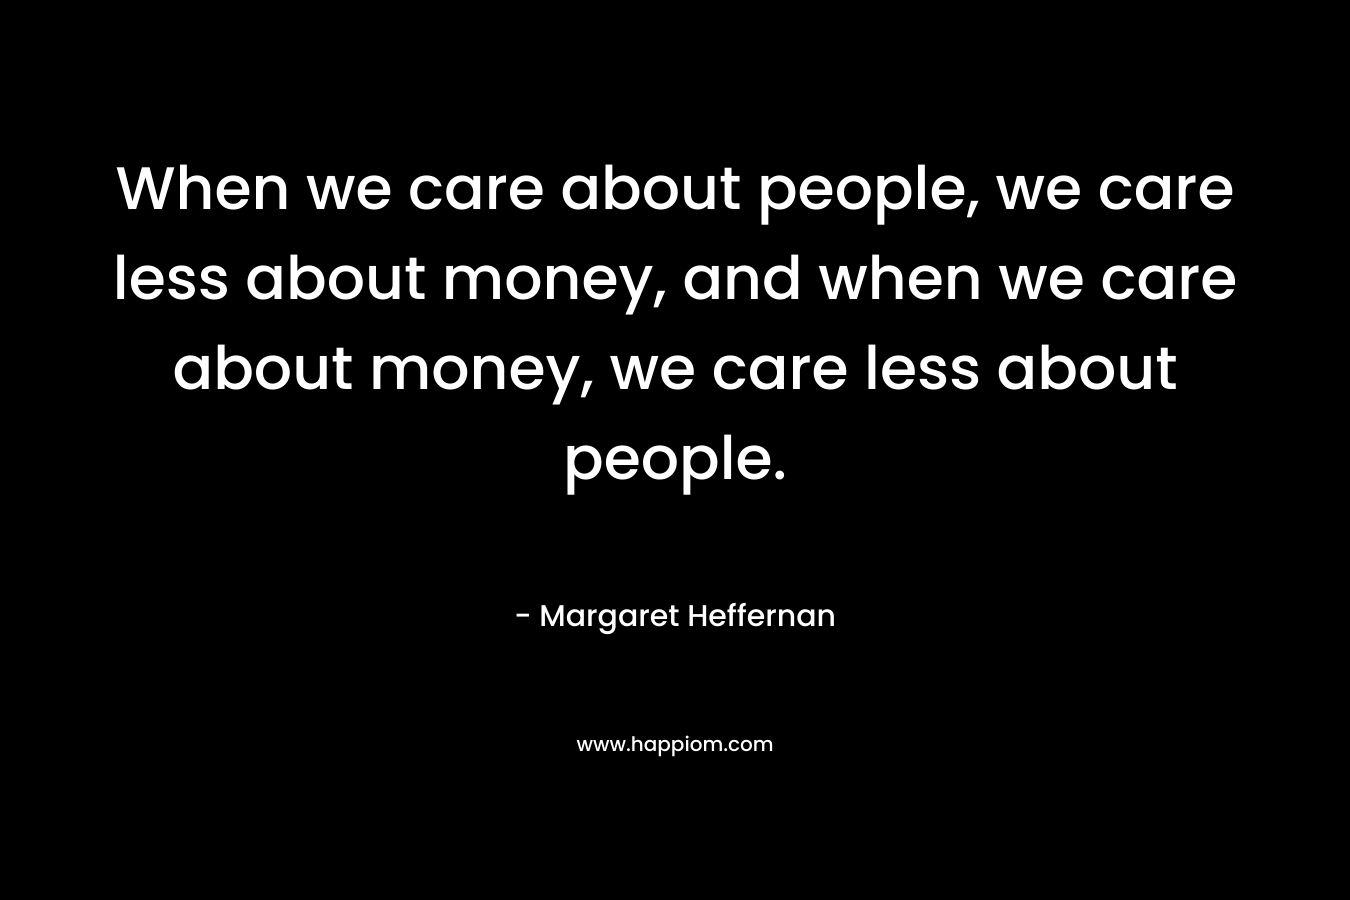 When we care about people, we care less about money, and when we care about money, we care less about people.